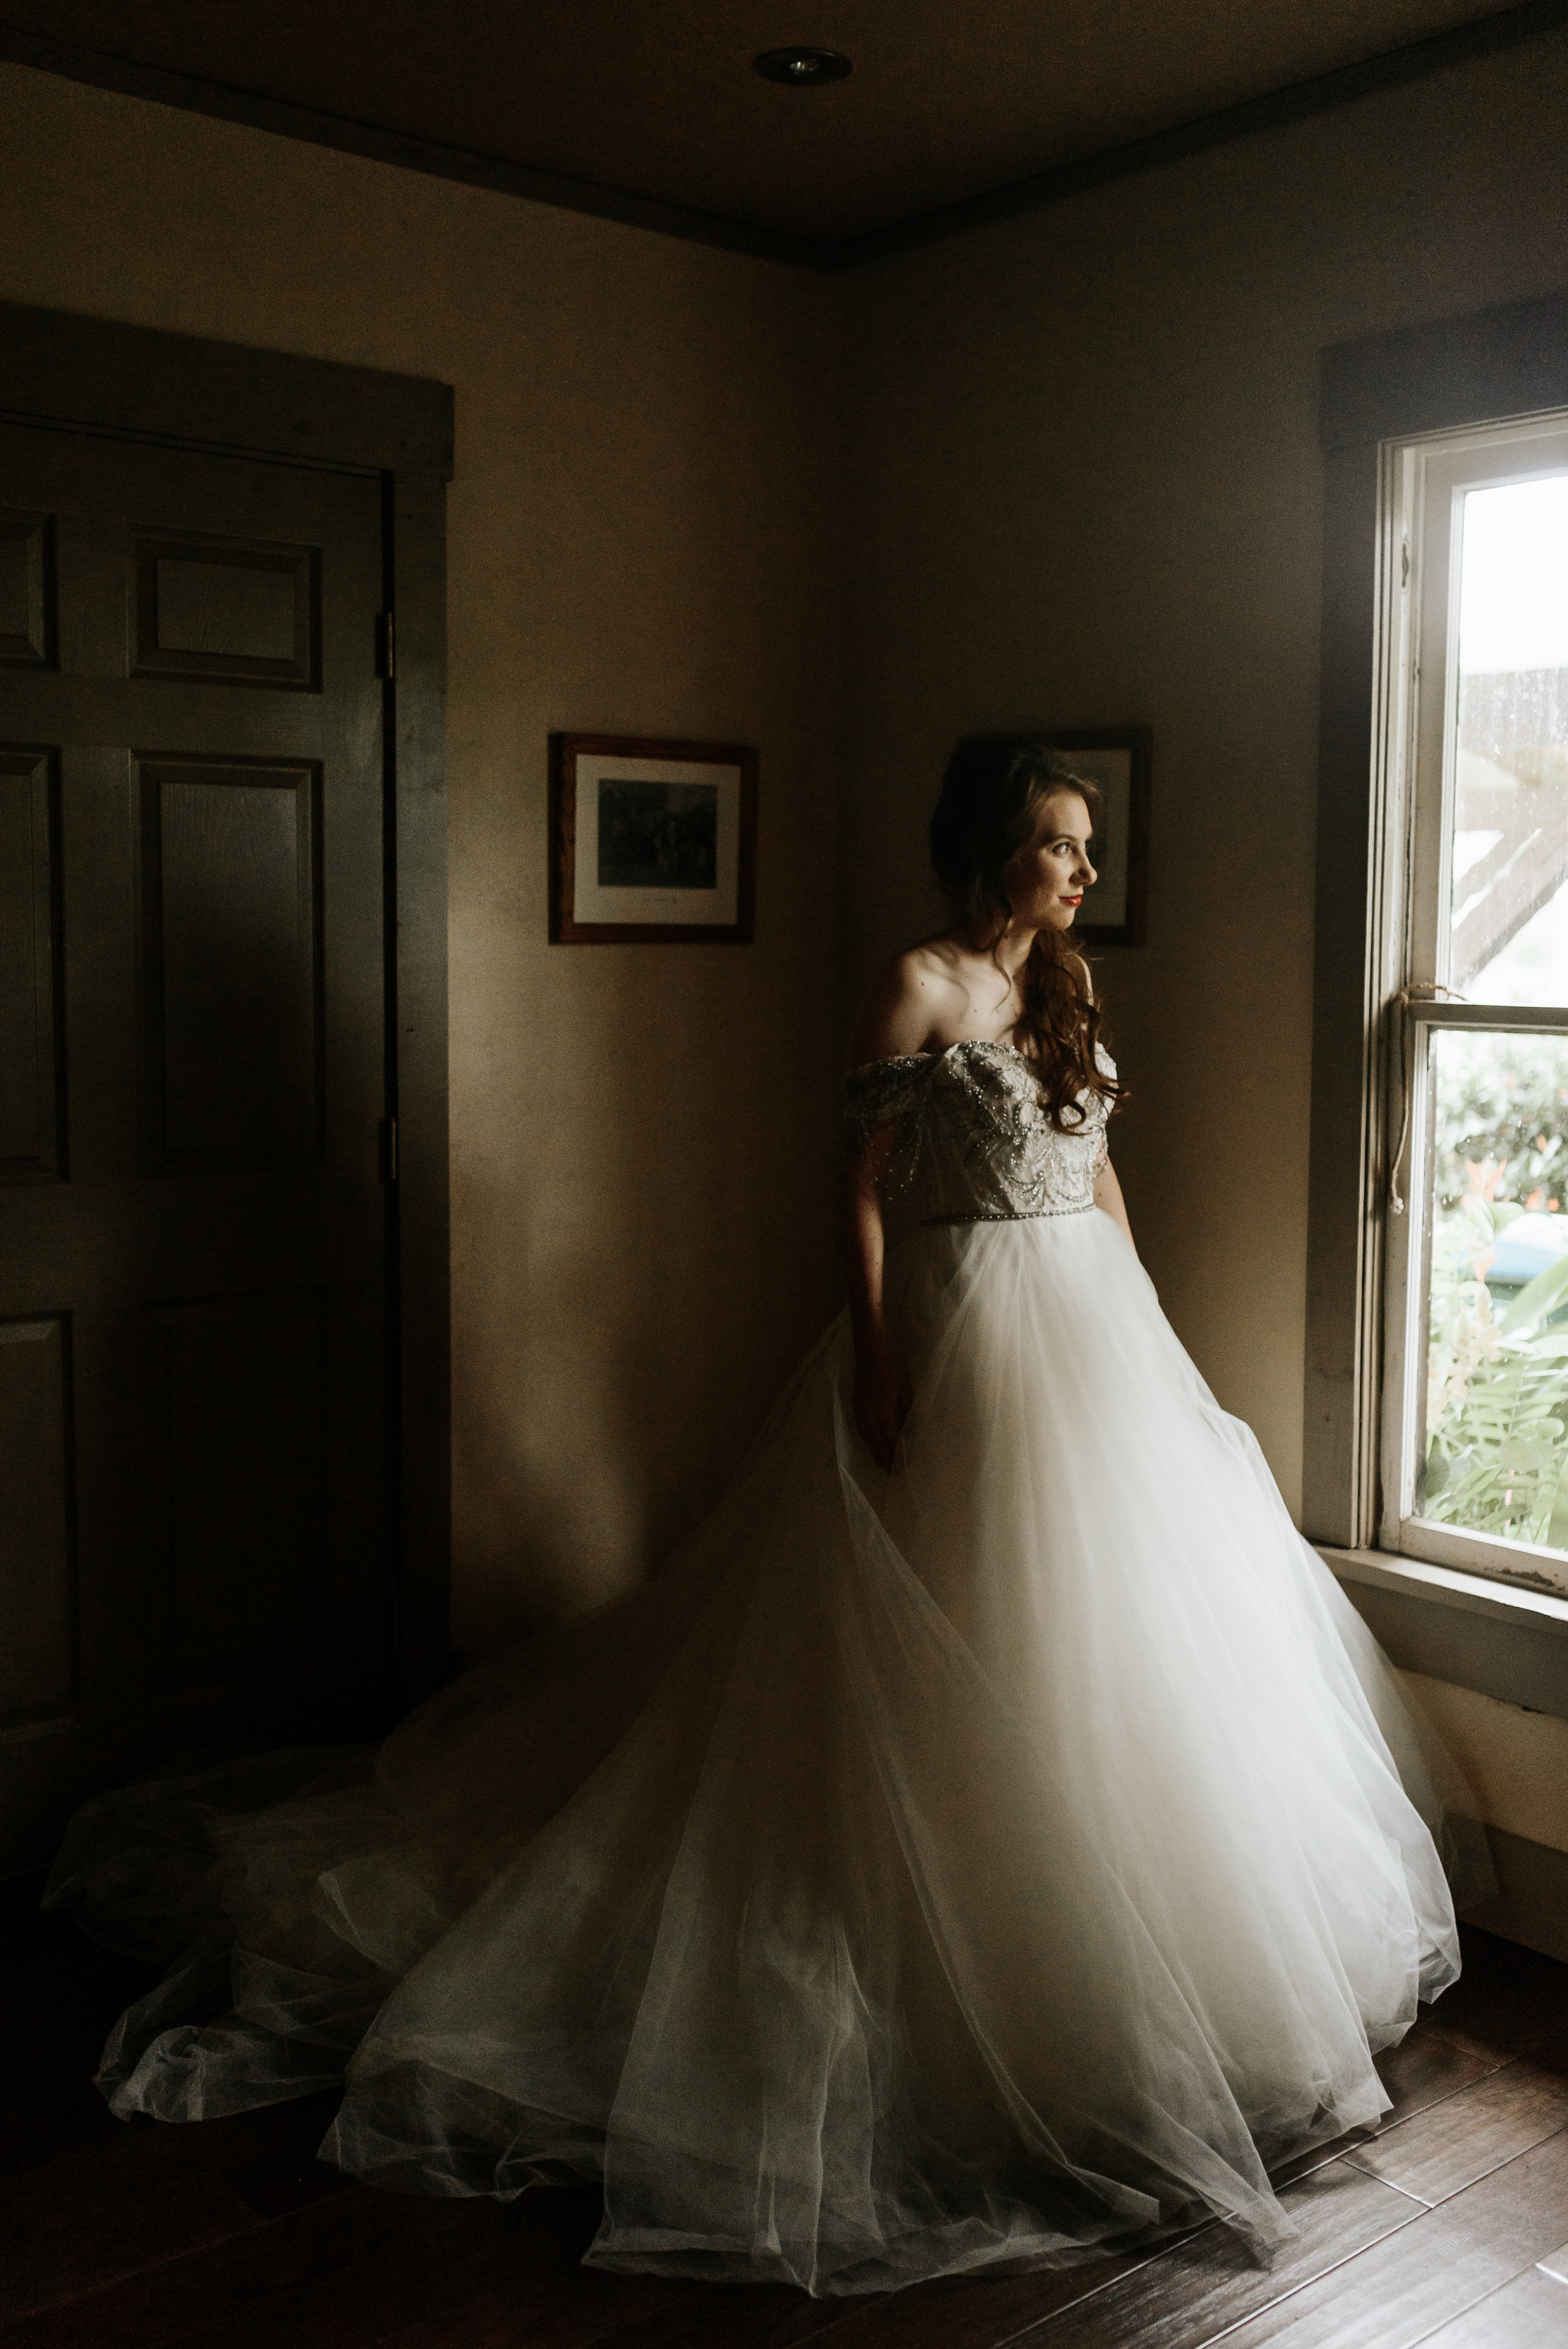 Grant-Station-Styled-Shoot-Whimsical-Moody-Fairytale-Wedding-Photography-by-V-9657.jpg